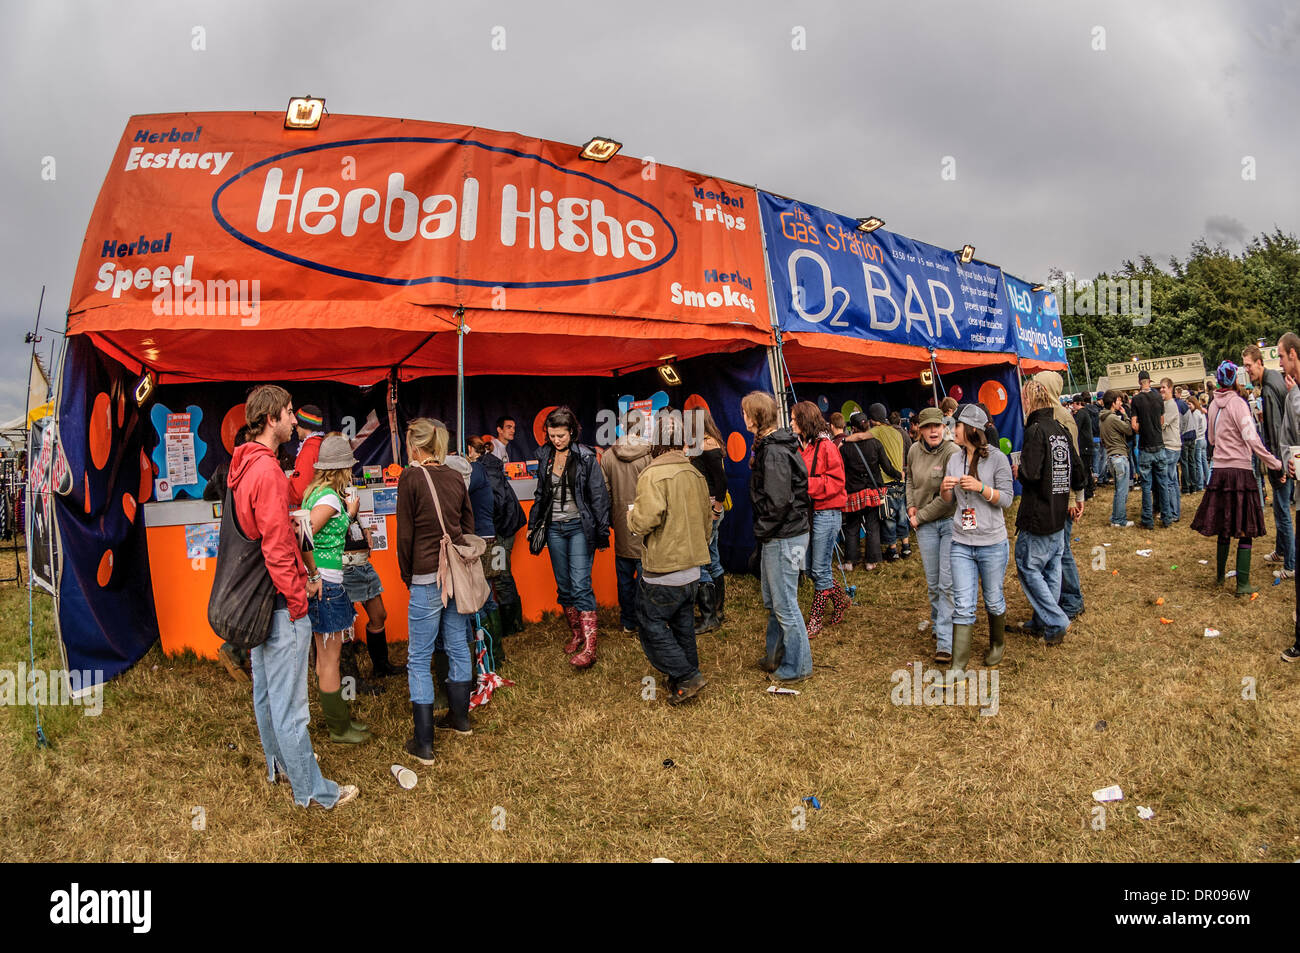 Herbal Highs and Oxygen bar at music festival Stock Photo